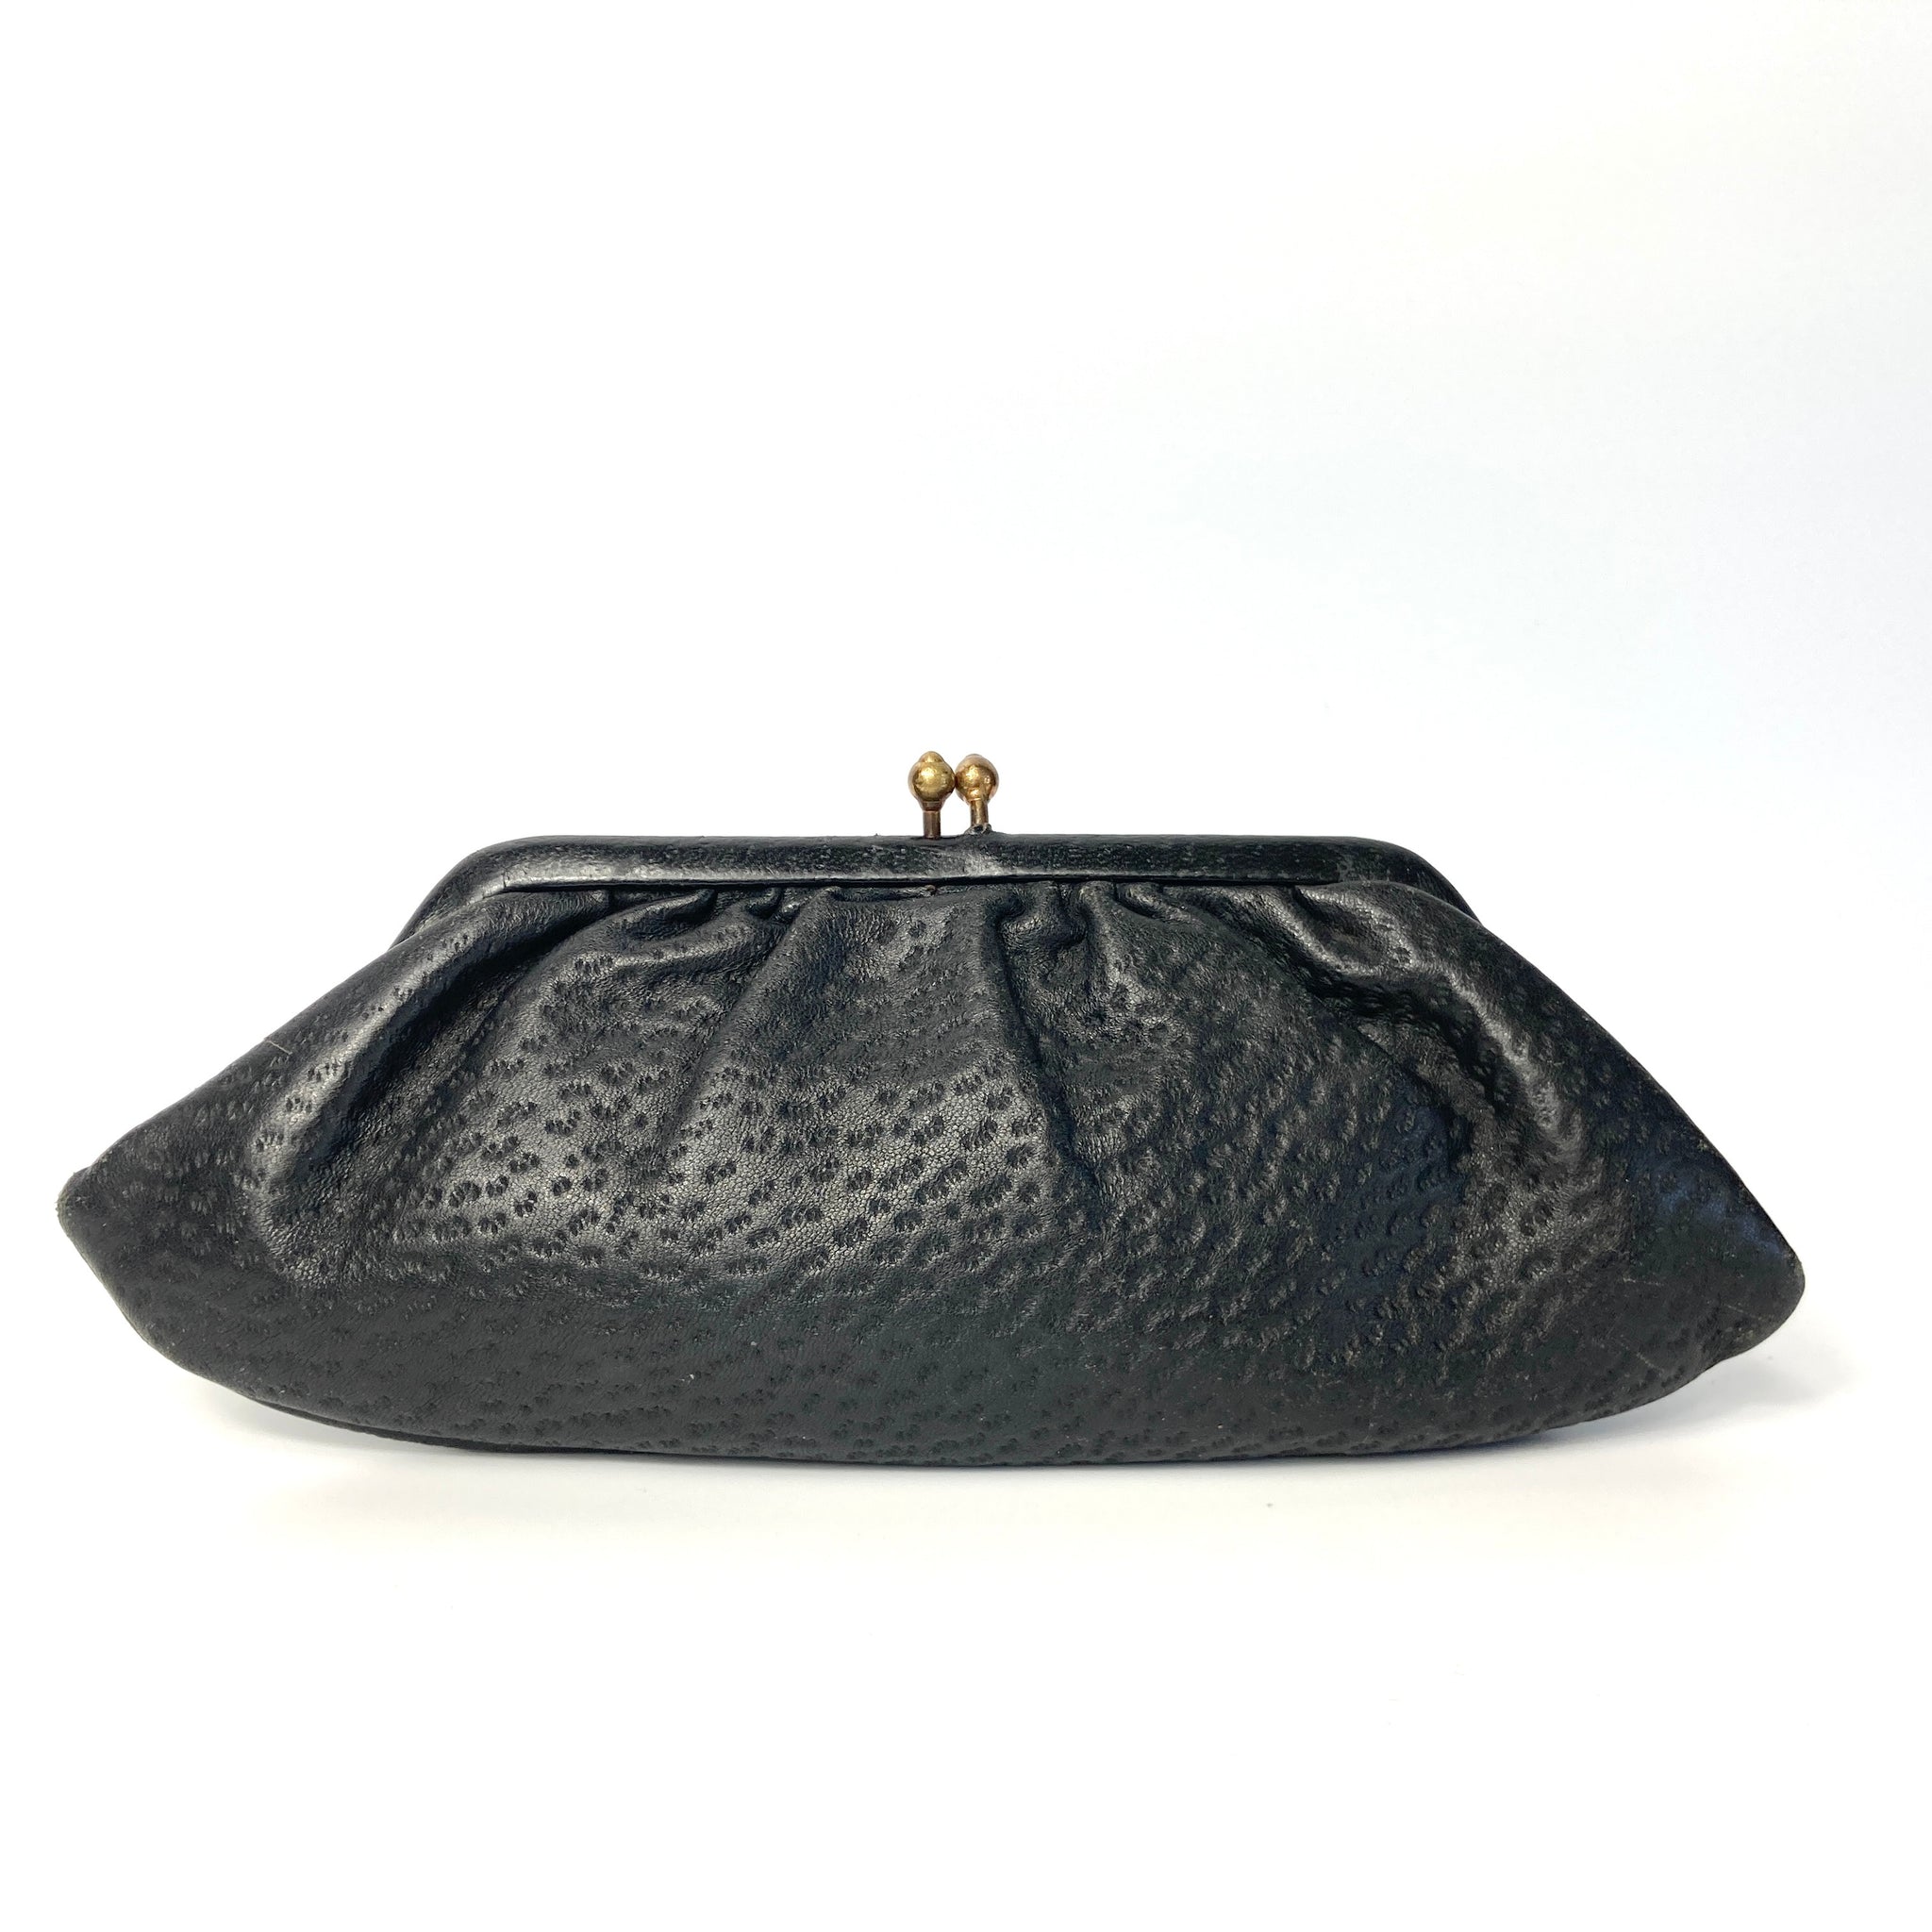 Womens Classic Pattern Black Leather Clutch Bag Portable And Casual Fashion  Purse With Zipper From Mikih, $42.84 | DHgate.Com